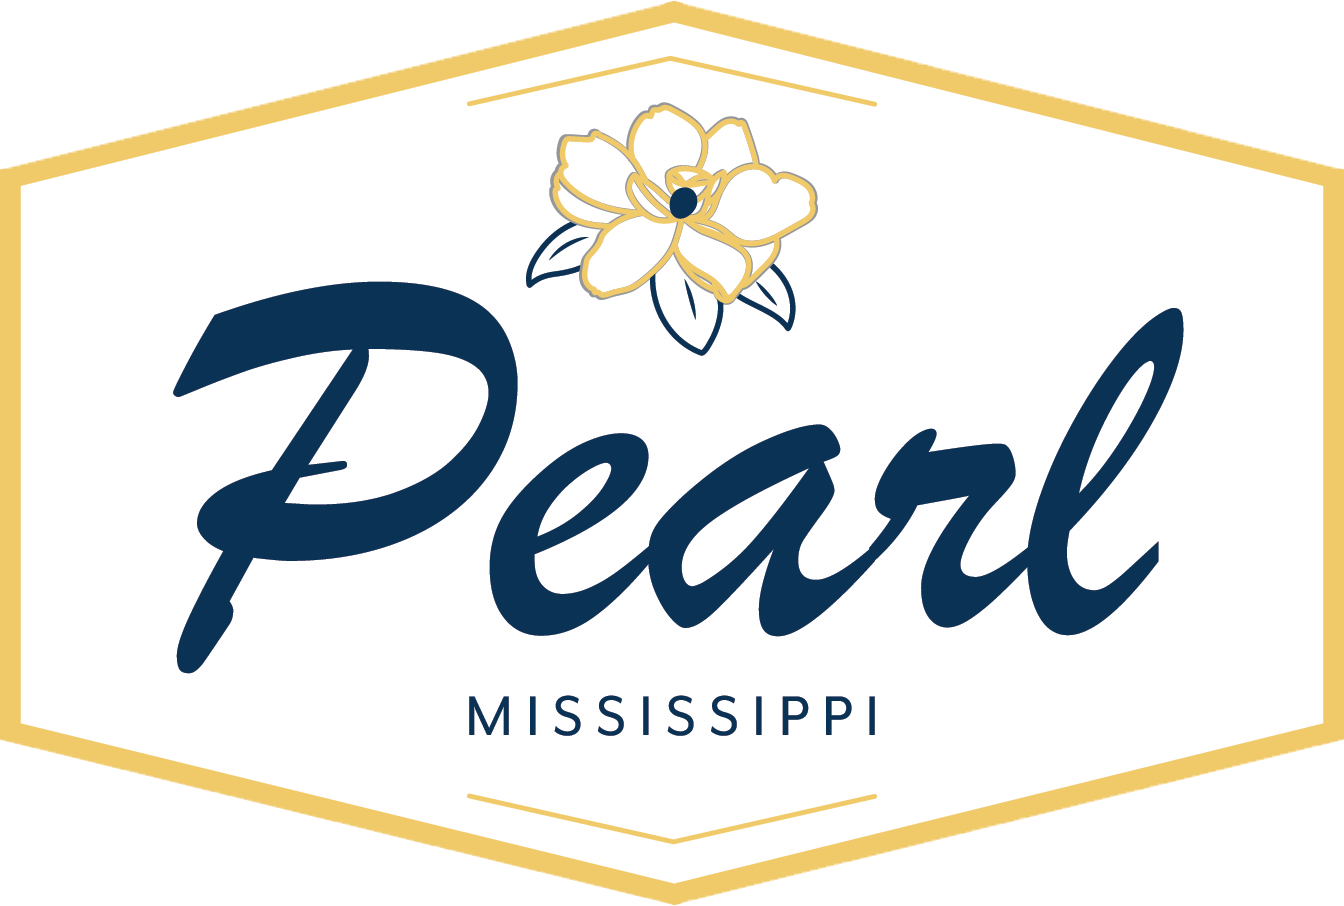 City of Pearl